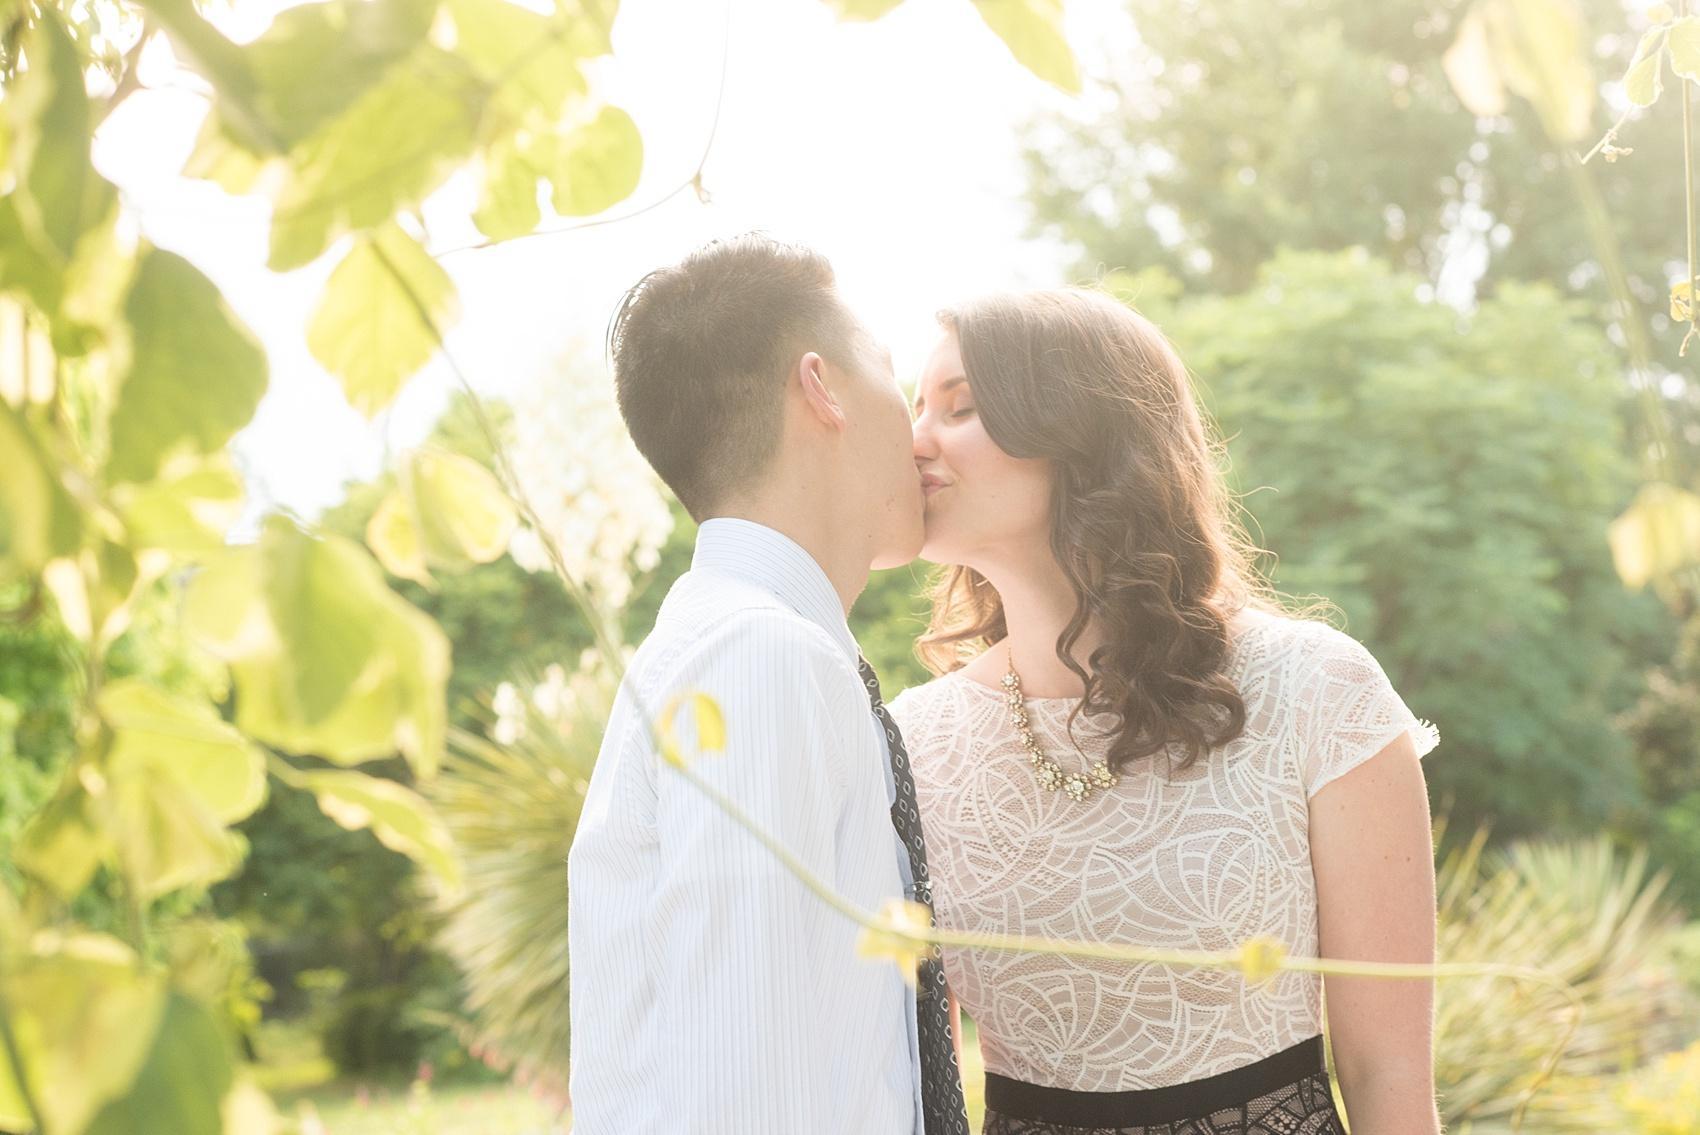 Raleigh North Carolina wedding photographer, Mikkel Paige Photography, photographs an engagement session at Raulston Arboretum at NC State campus during golden hour.